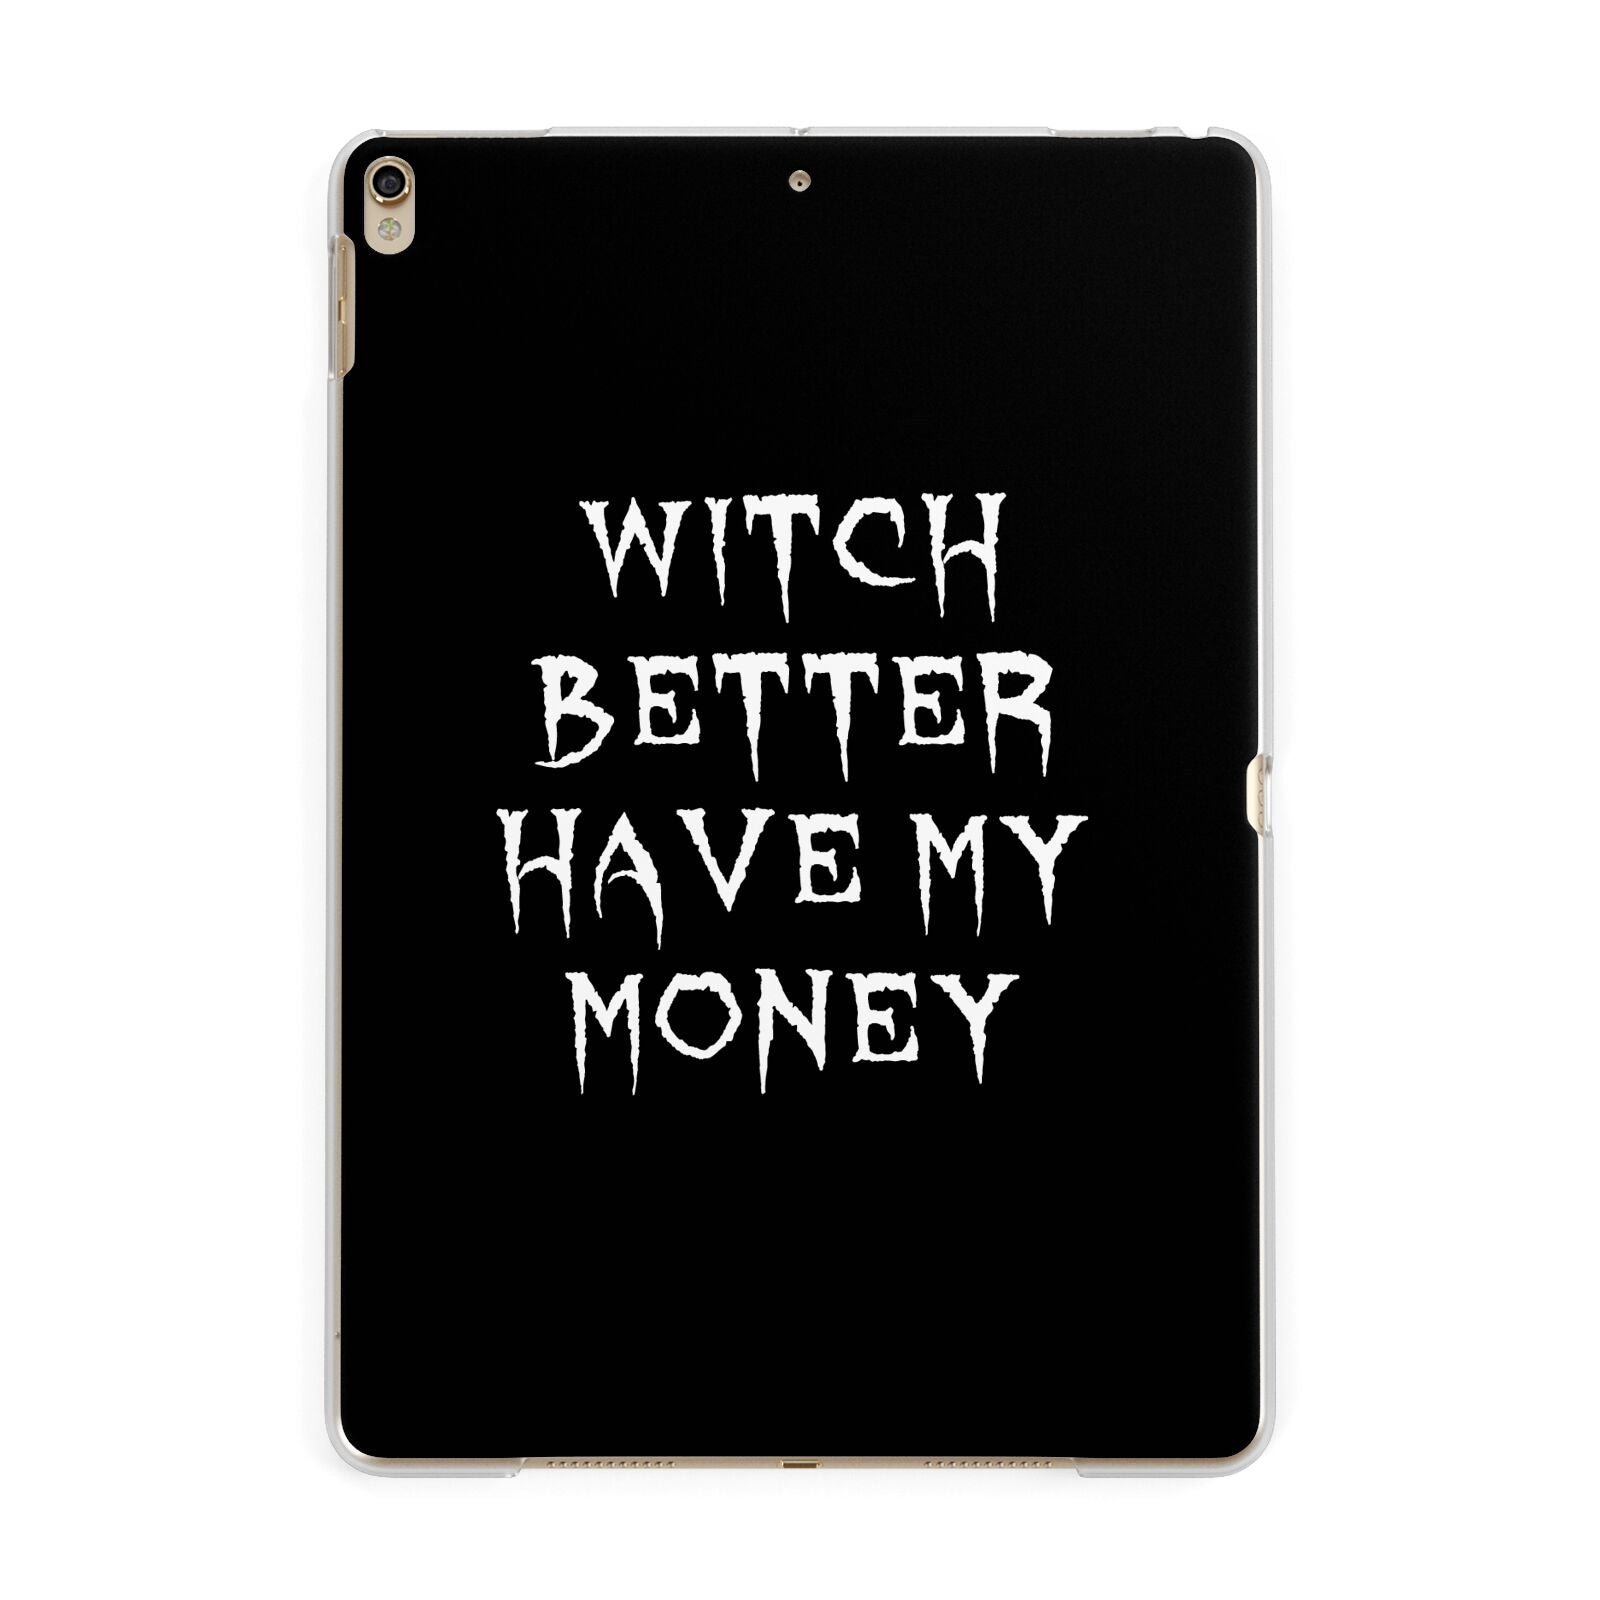 Witch Better Have My Money Apple iPad Gold Case